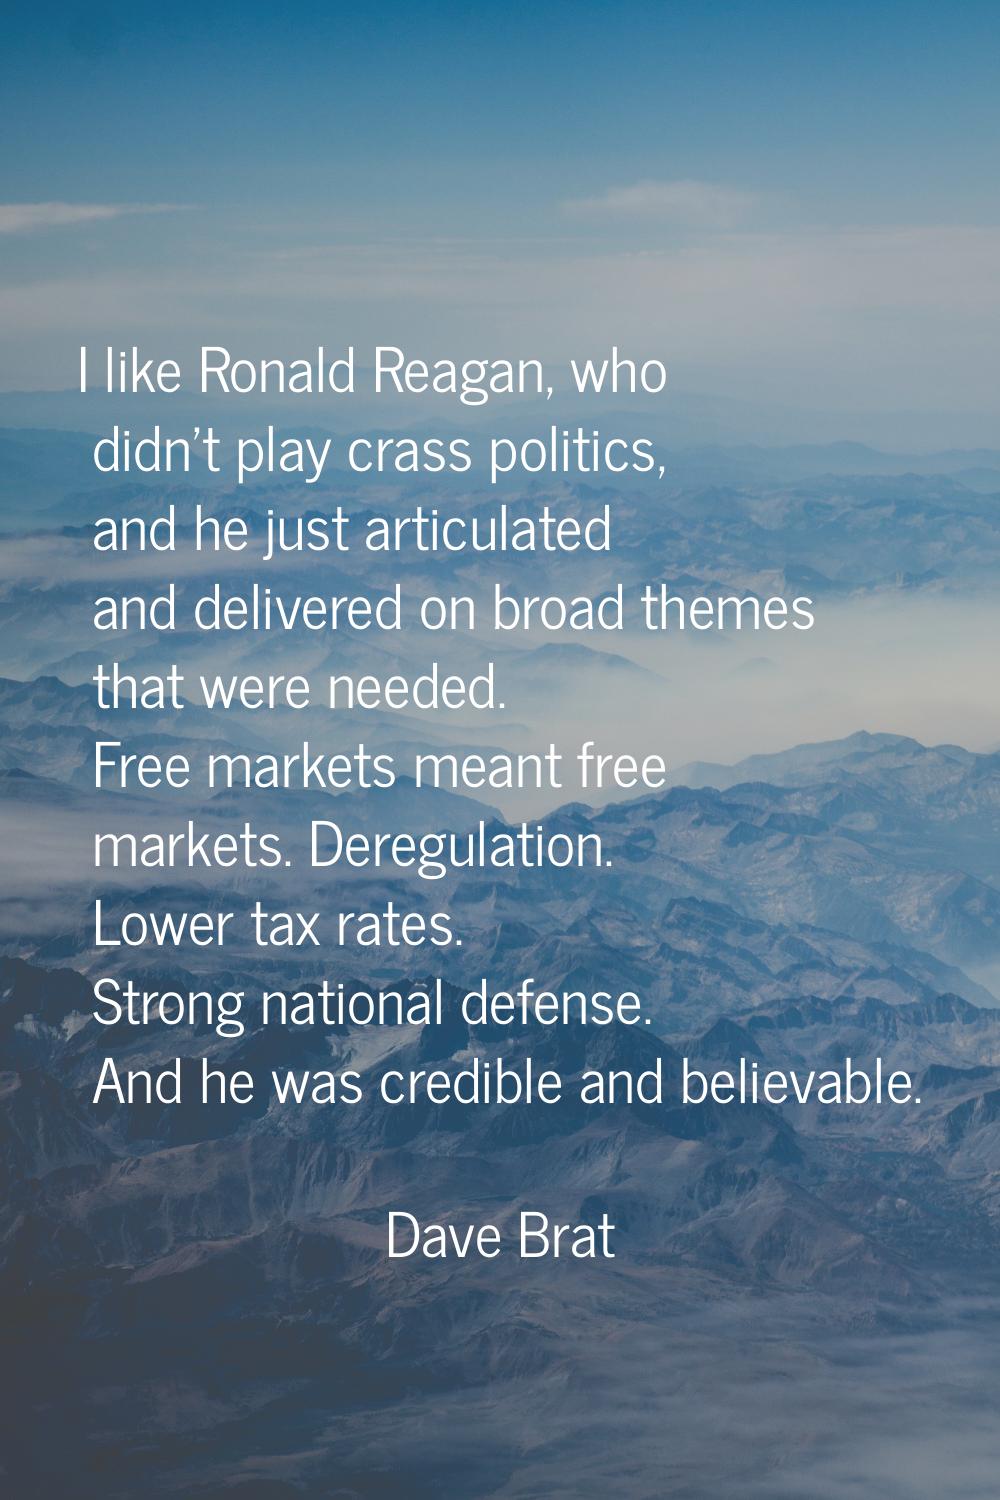 I like Ronald Reagan, who didn't play crass politics, and he just articulated and delivered on broa